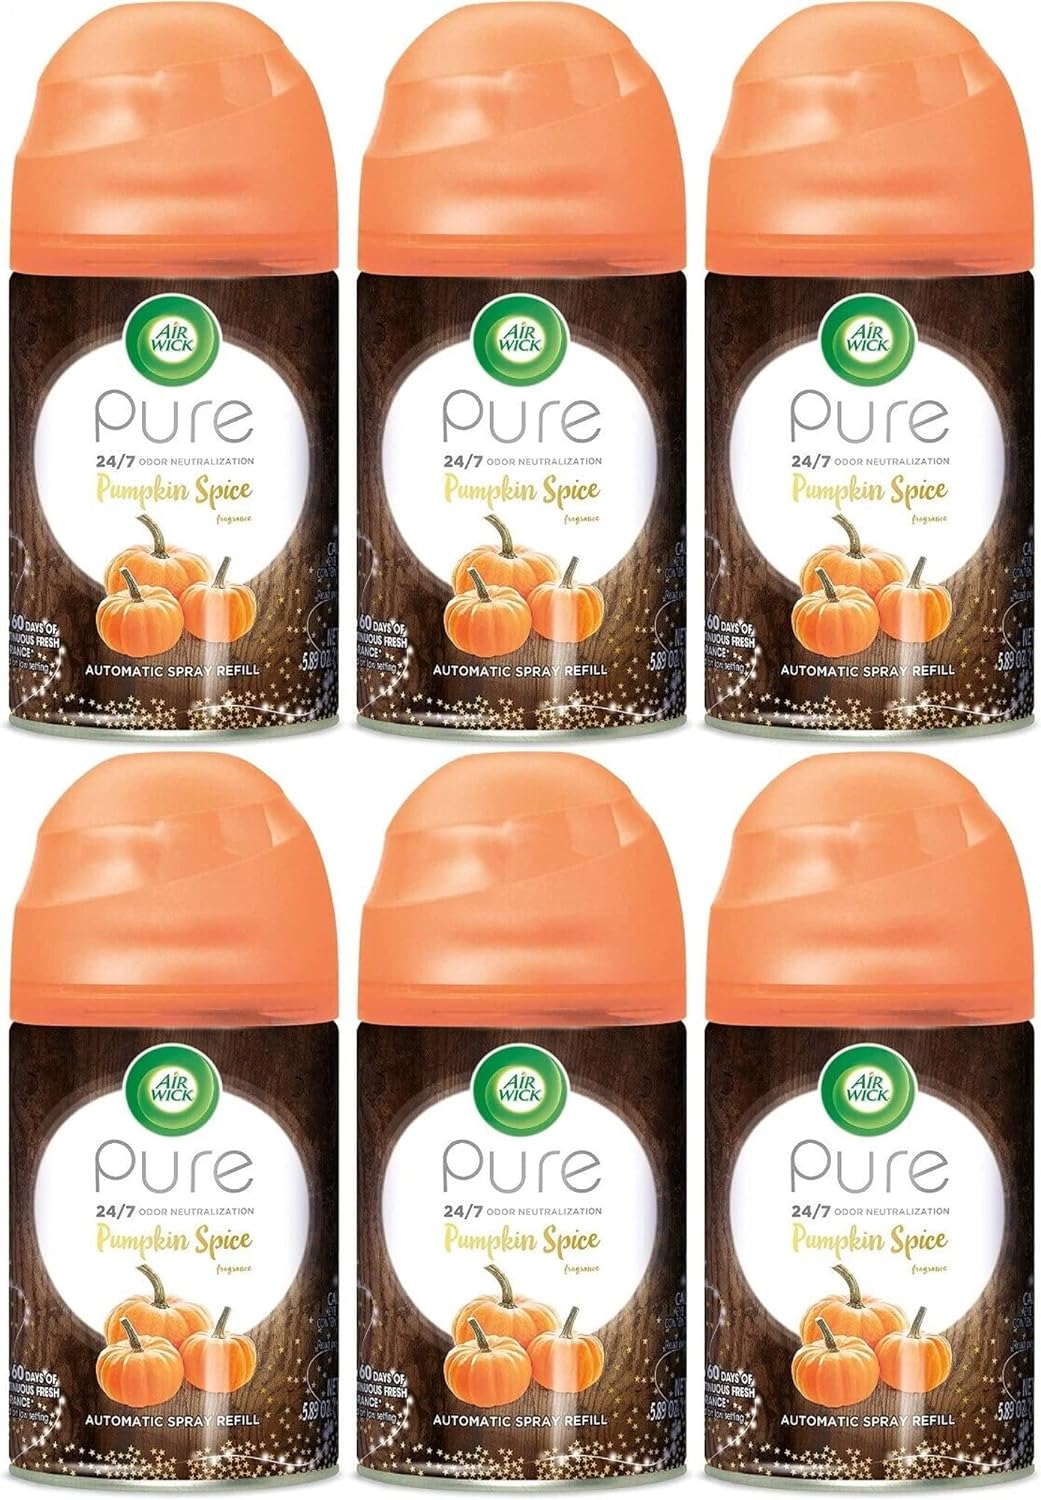 Air Wick Pure Freshmatic Refill Automatic Spray, Air Freshener, Essential Oil, Odor Neutralization, Packaging May Vary (Pumpkin Spice, 5.89 Ounce (Pack of 6))